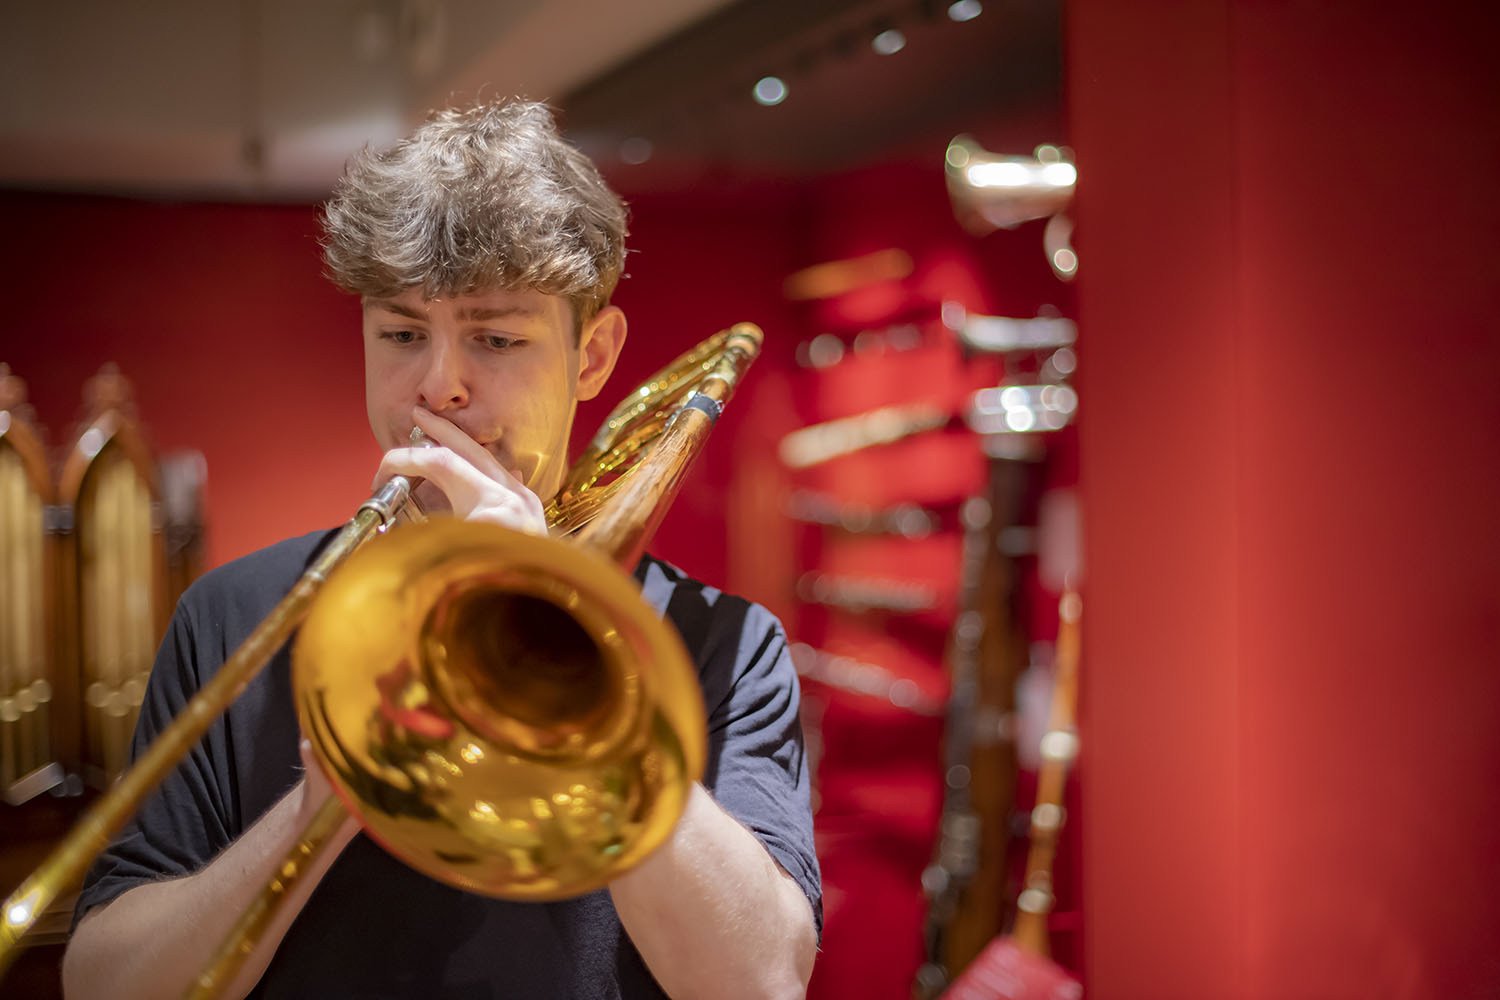 A man with short brown hear wearing a black t-shirt performs on a trombone in the Royal College of Music Museum